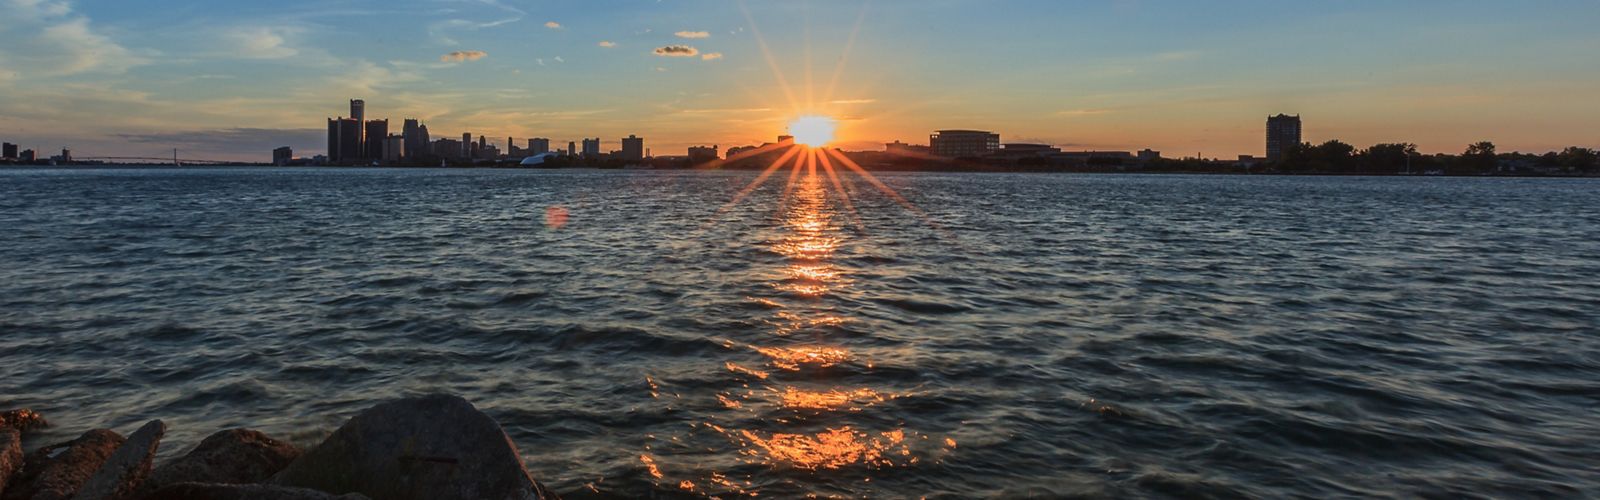 View from the water of sun setting behind the Detroit skyline.